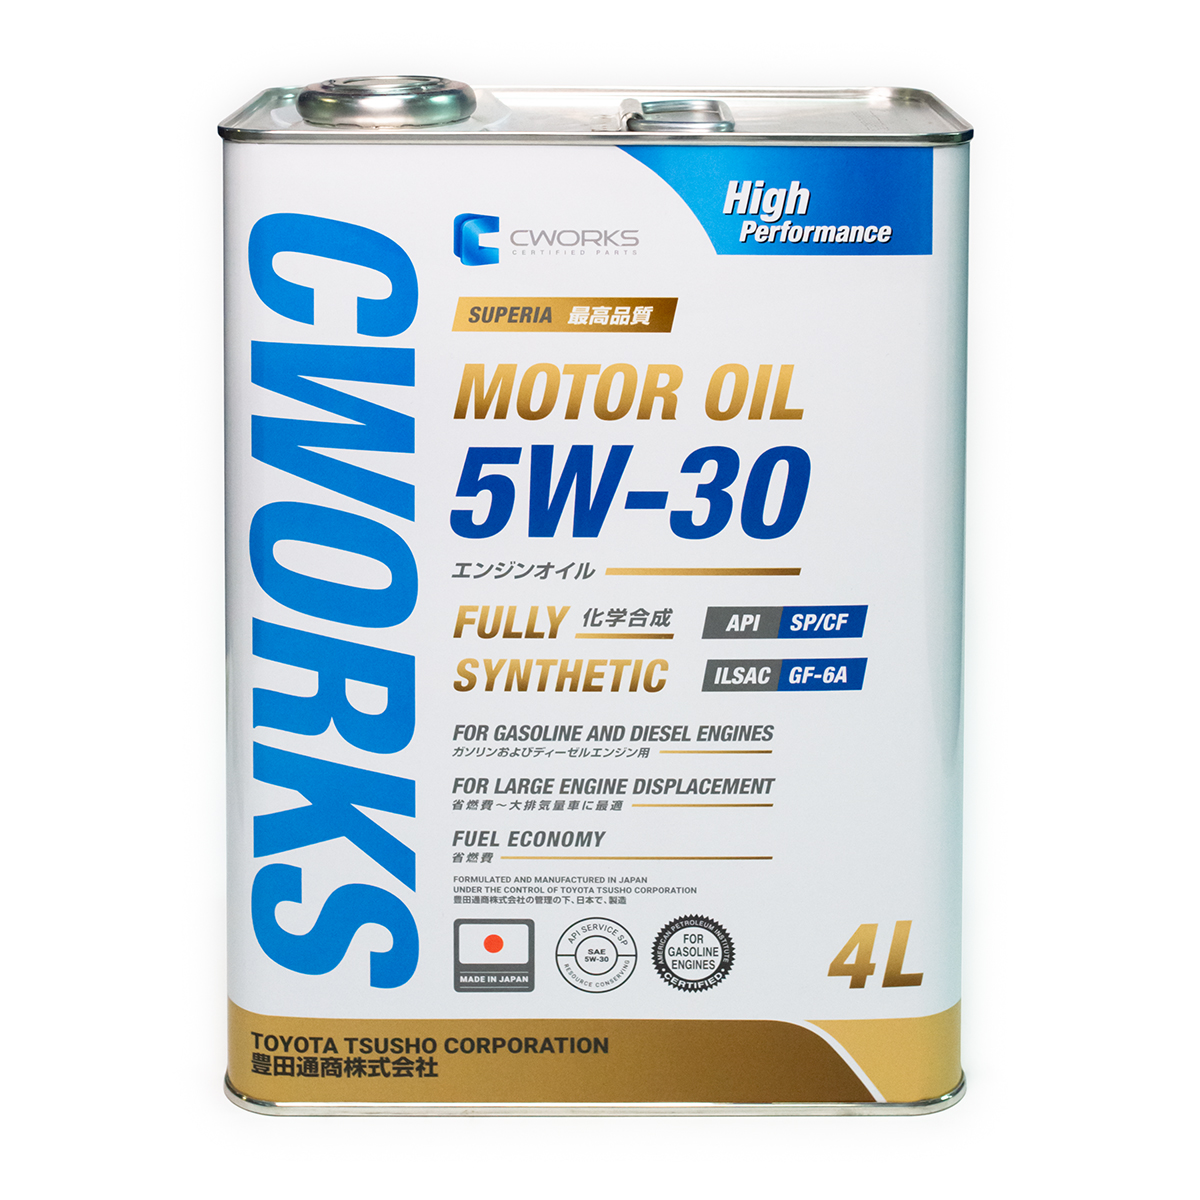 Superia motor OIL 5w-30 sp/cf, 4L Масло моторное - CWORKS A13SR1004